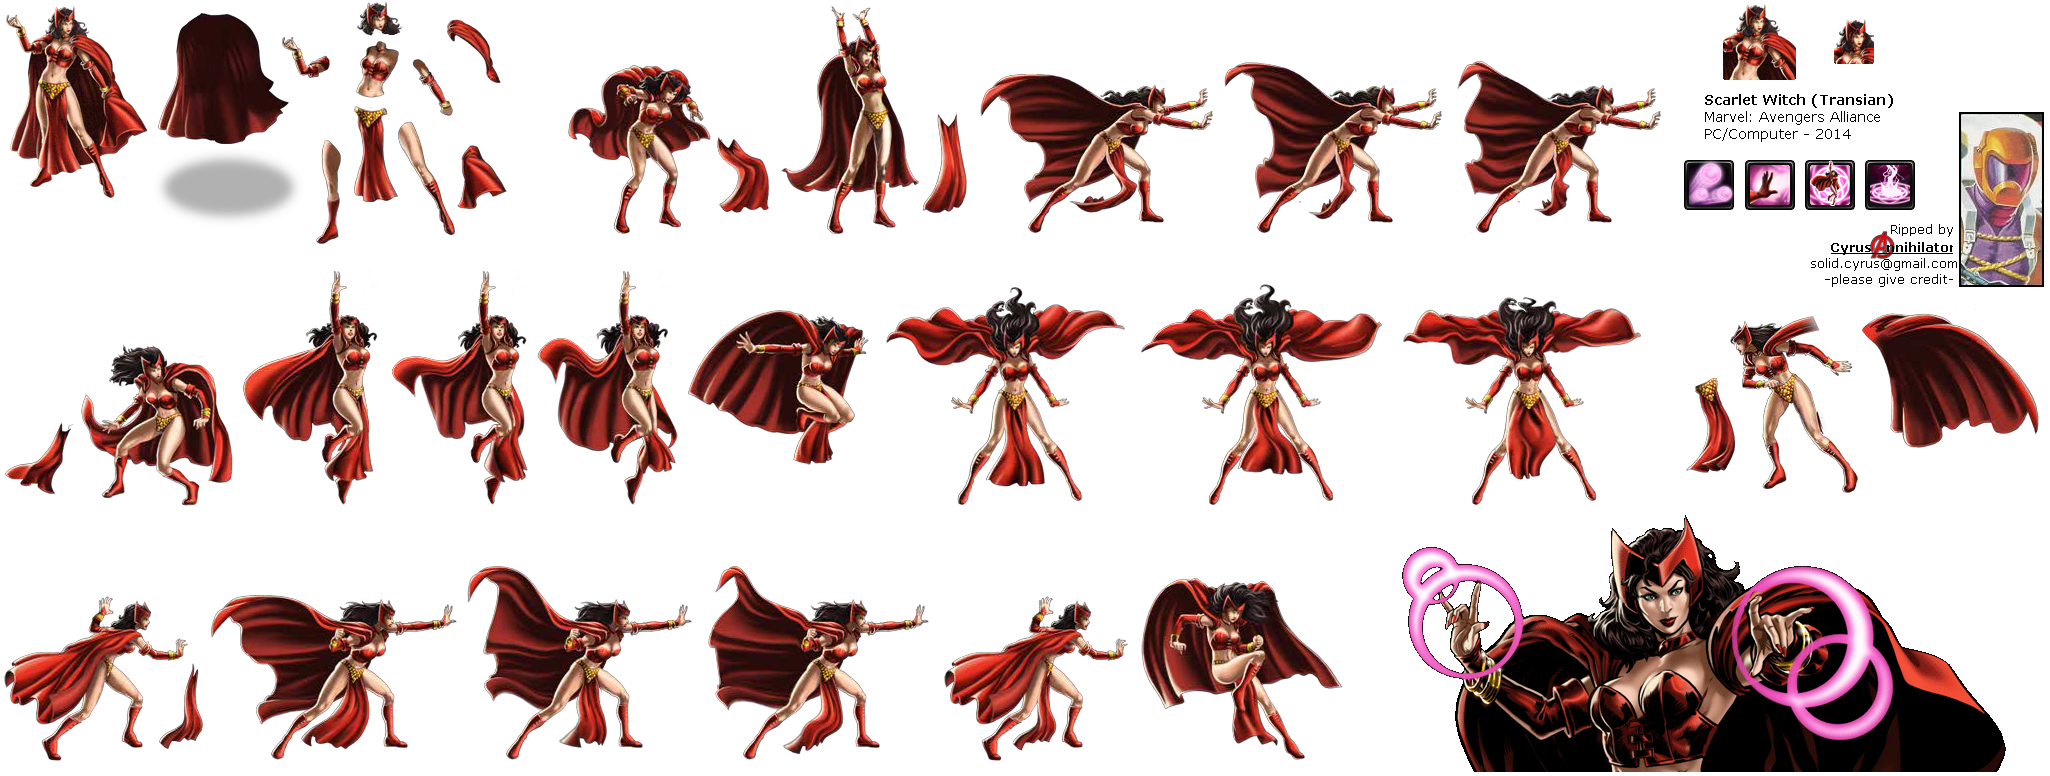 Marvel: Avengers Alliance - Scarlet Witch (Transian)